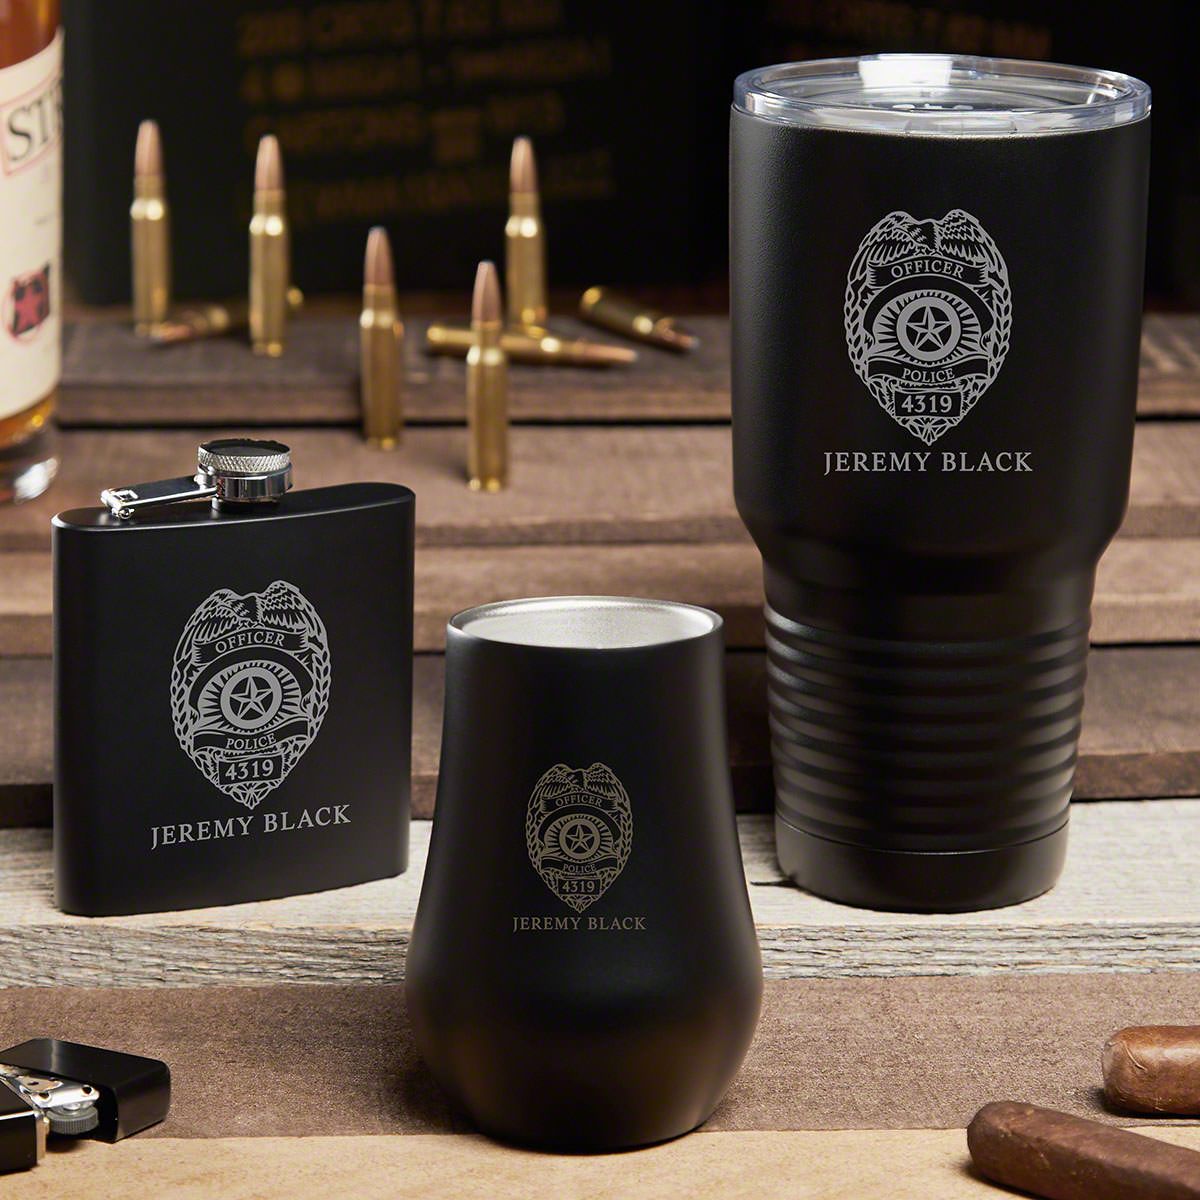 Police badge personalized 30oz Stainless insulated Tumbler Mug Cup Glass